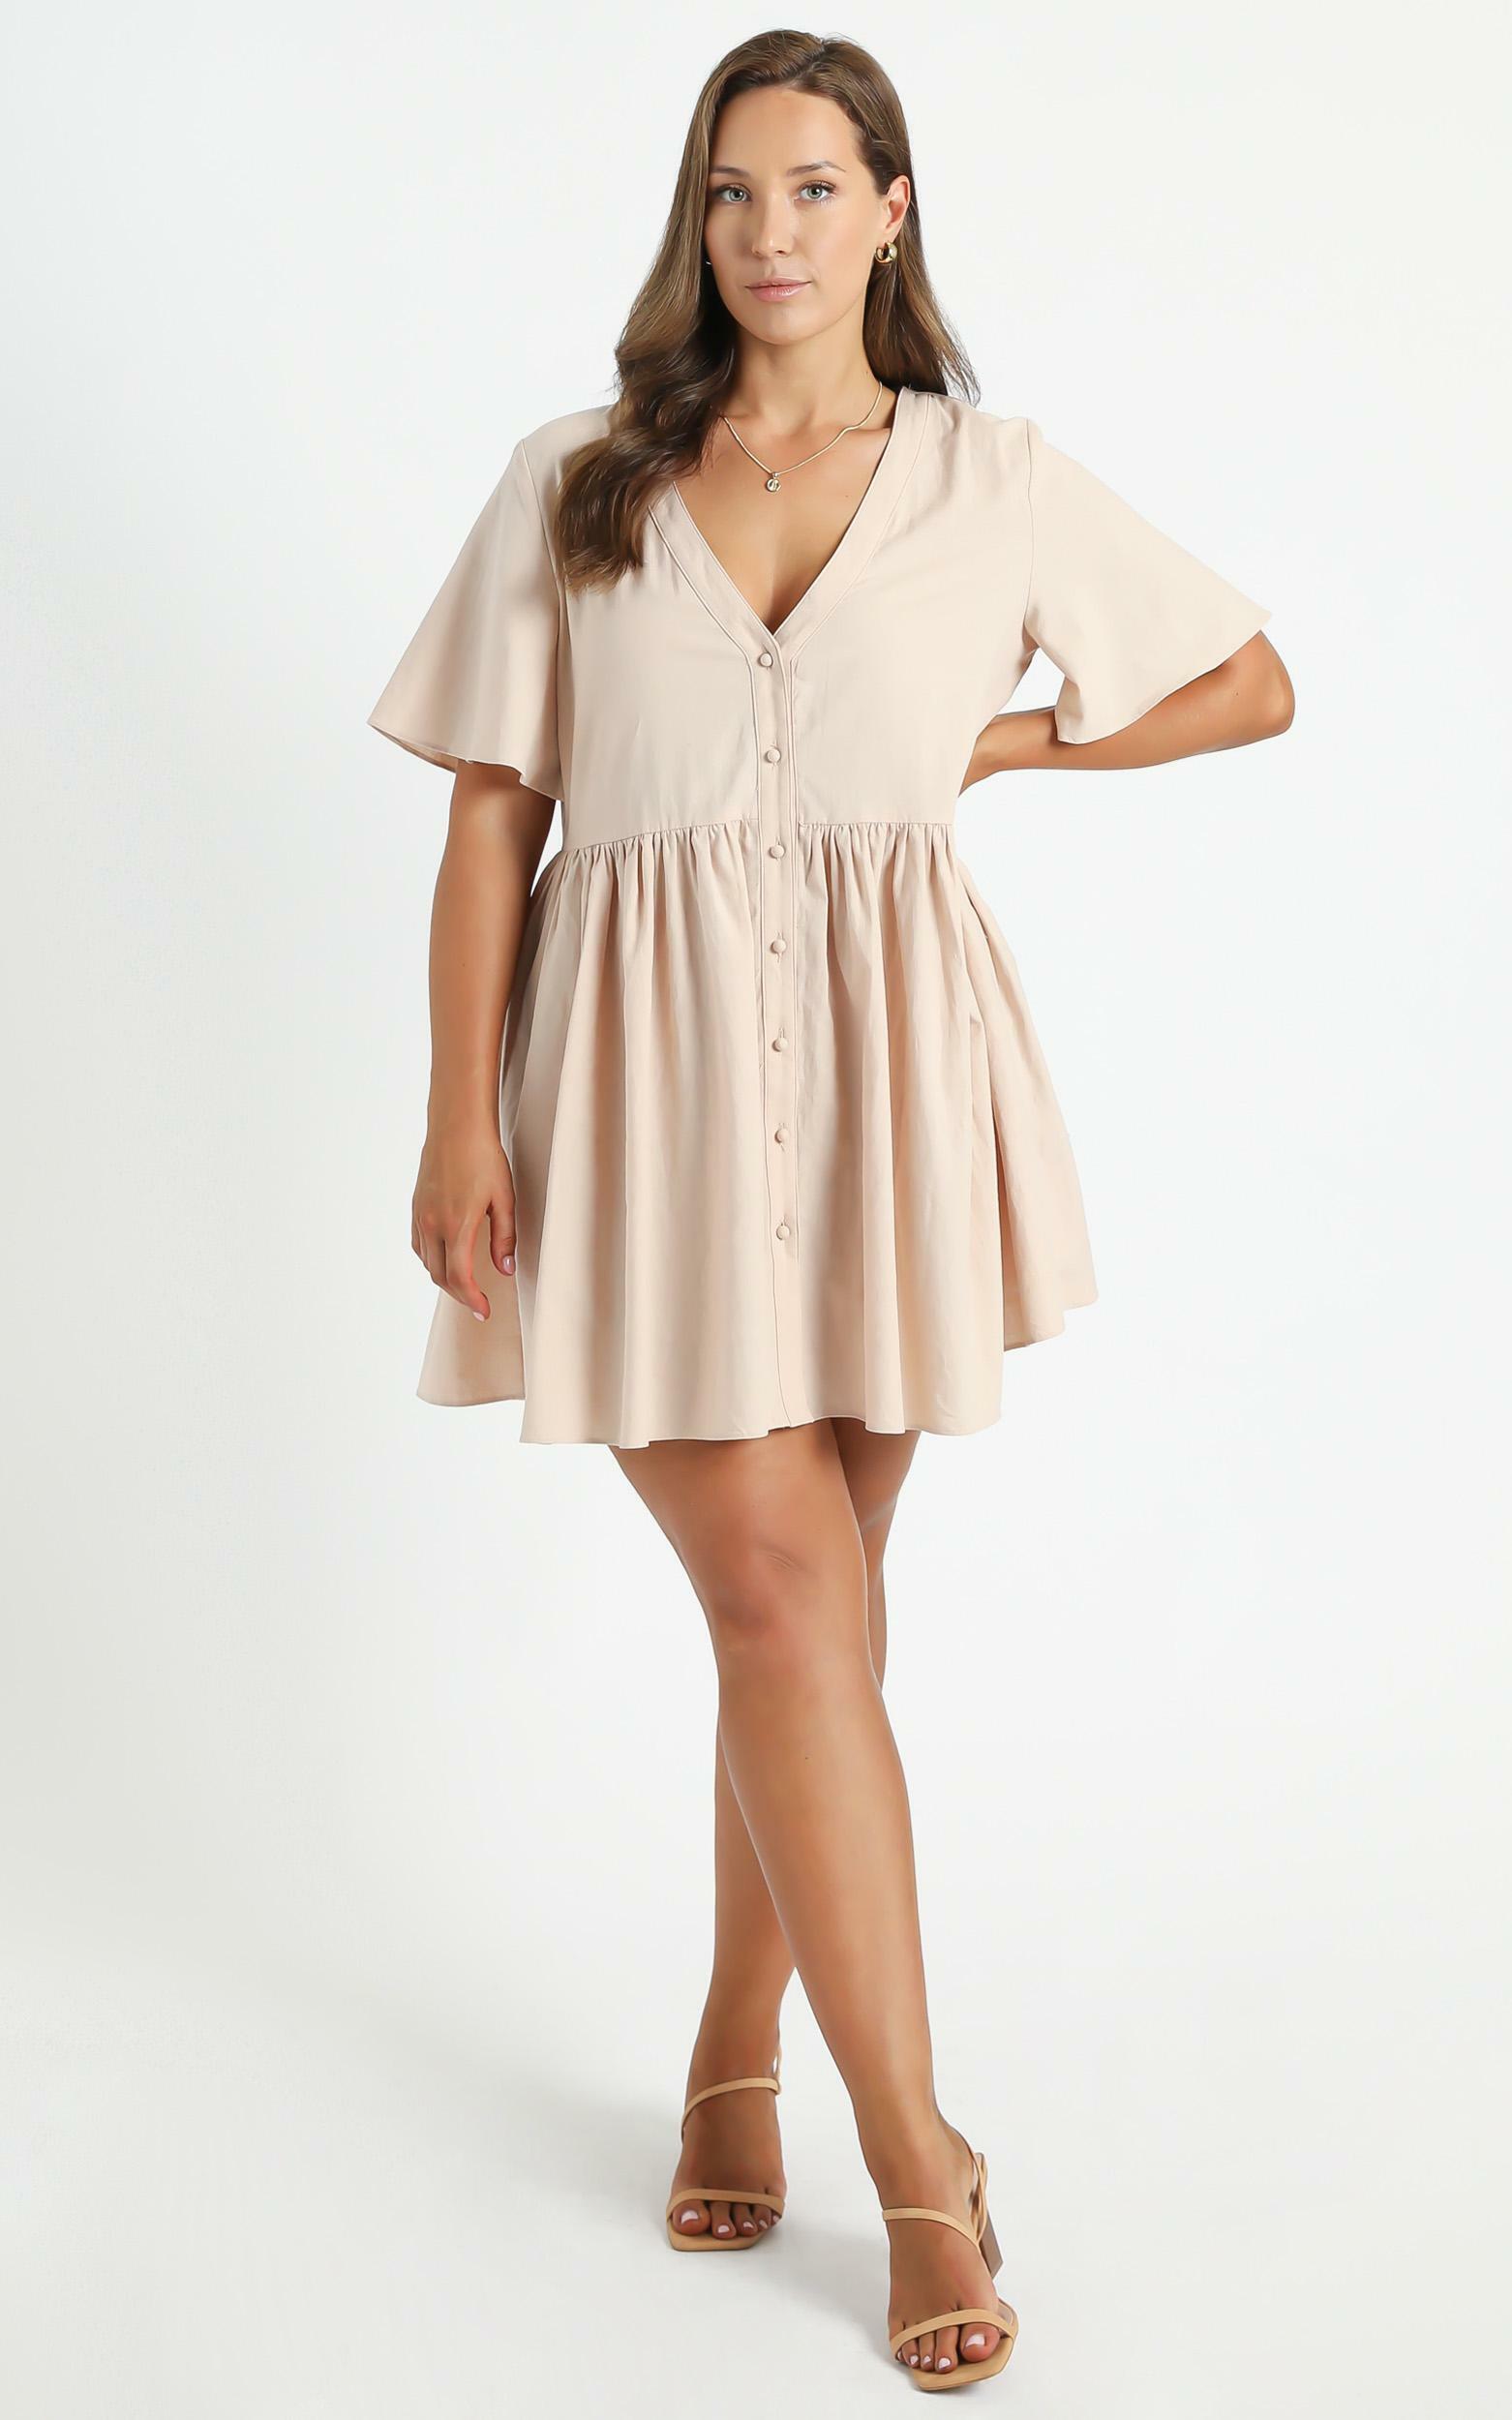 Staycation Smock Button Up Mini Dress in Beige - 20, BRN3, hi-res image number null